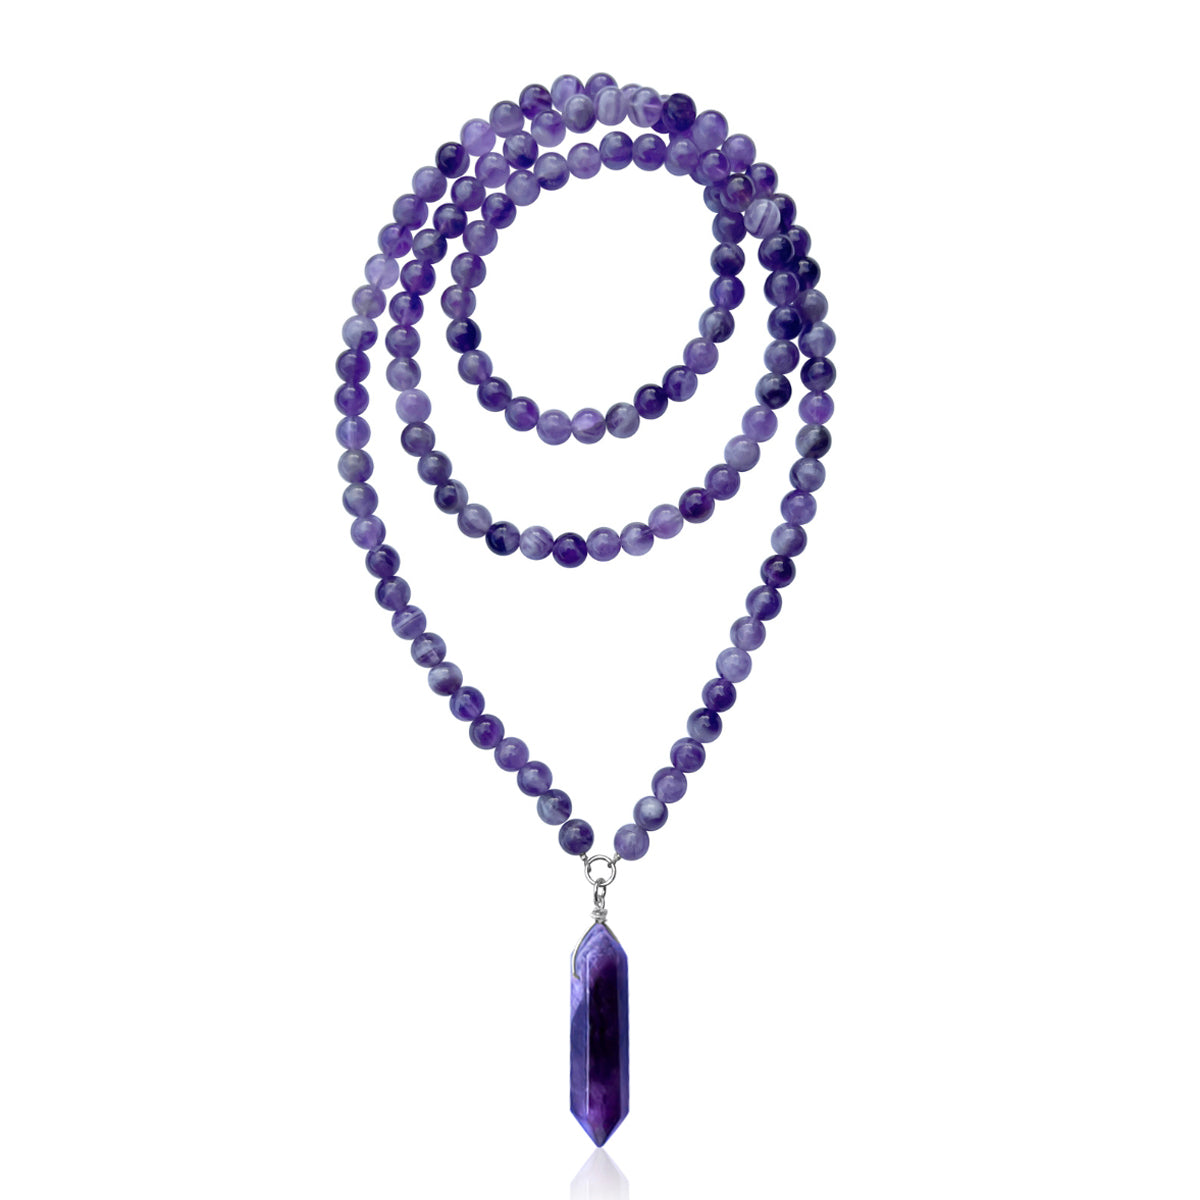 Hope is what keeps us running. Wear this Never Lose Hope Amethyst Necklace to help reduce stress and anxiety in your life.